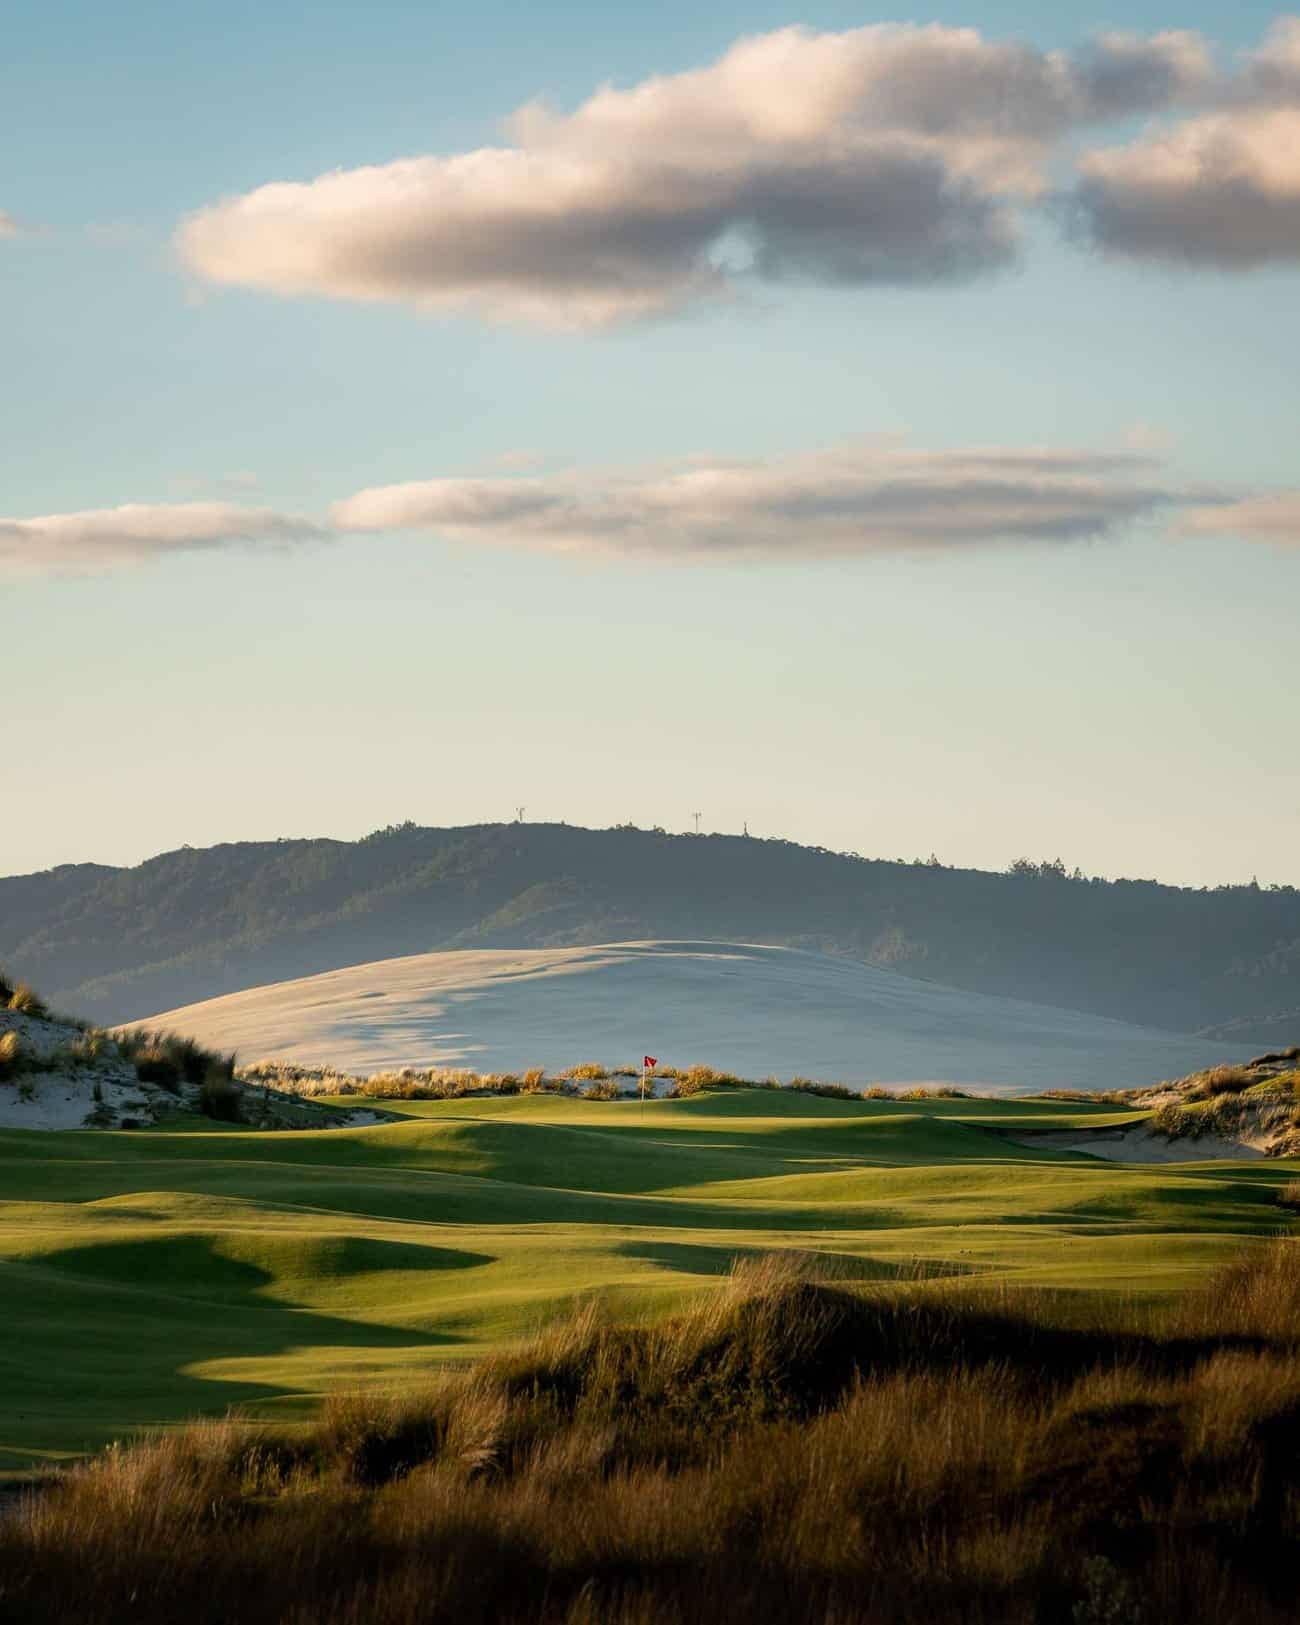 The 6th hole at Tara Iti with the Mangawhai sand dune and Brynderwyn Hills beyond. Credit: Ricky Robinson